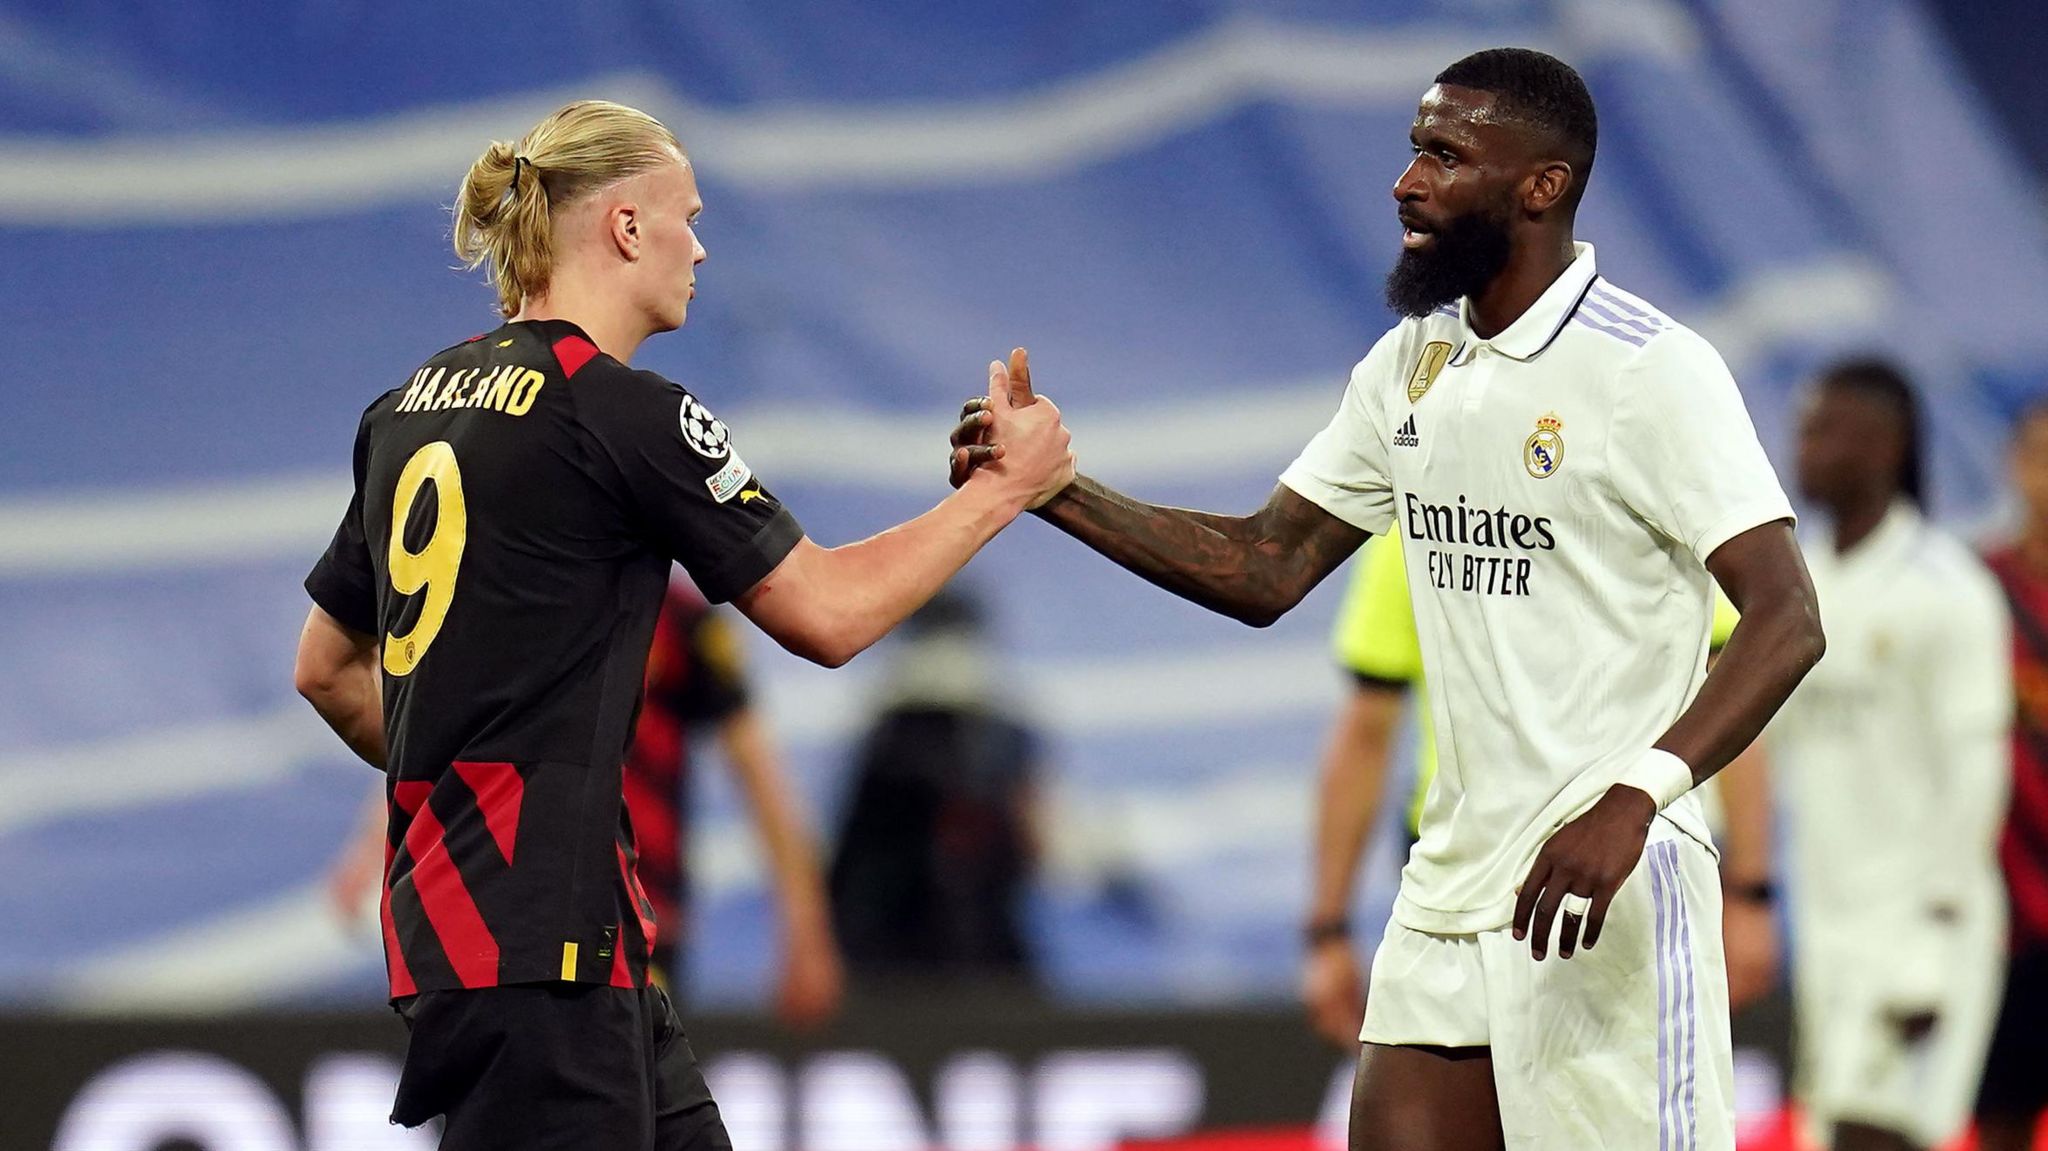 Rudiger shakes Haaland after Real Madrid's clash with Man City